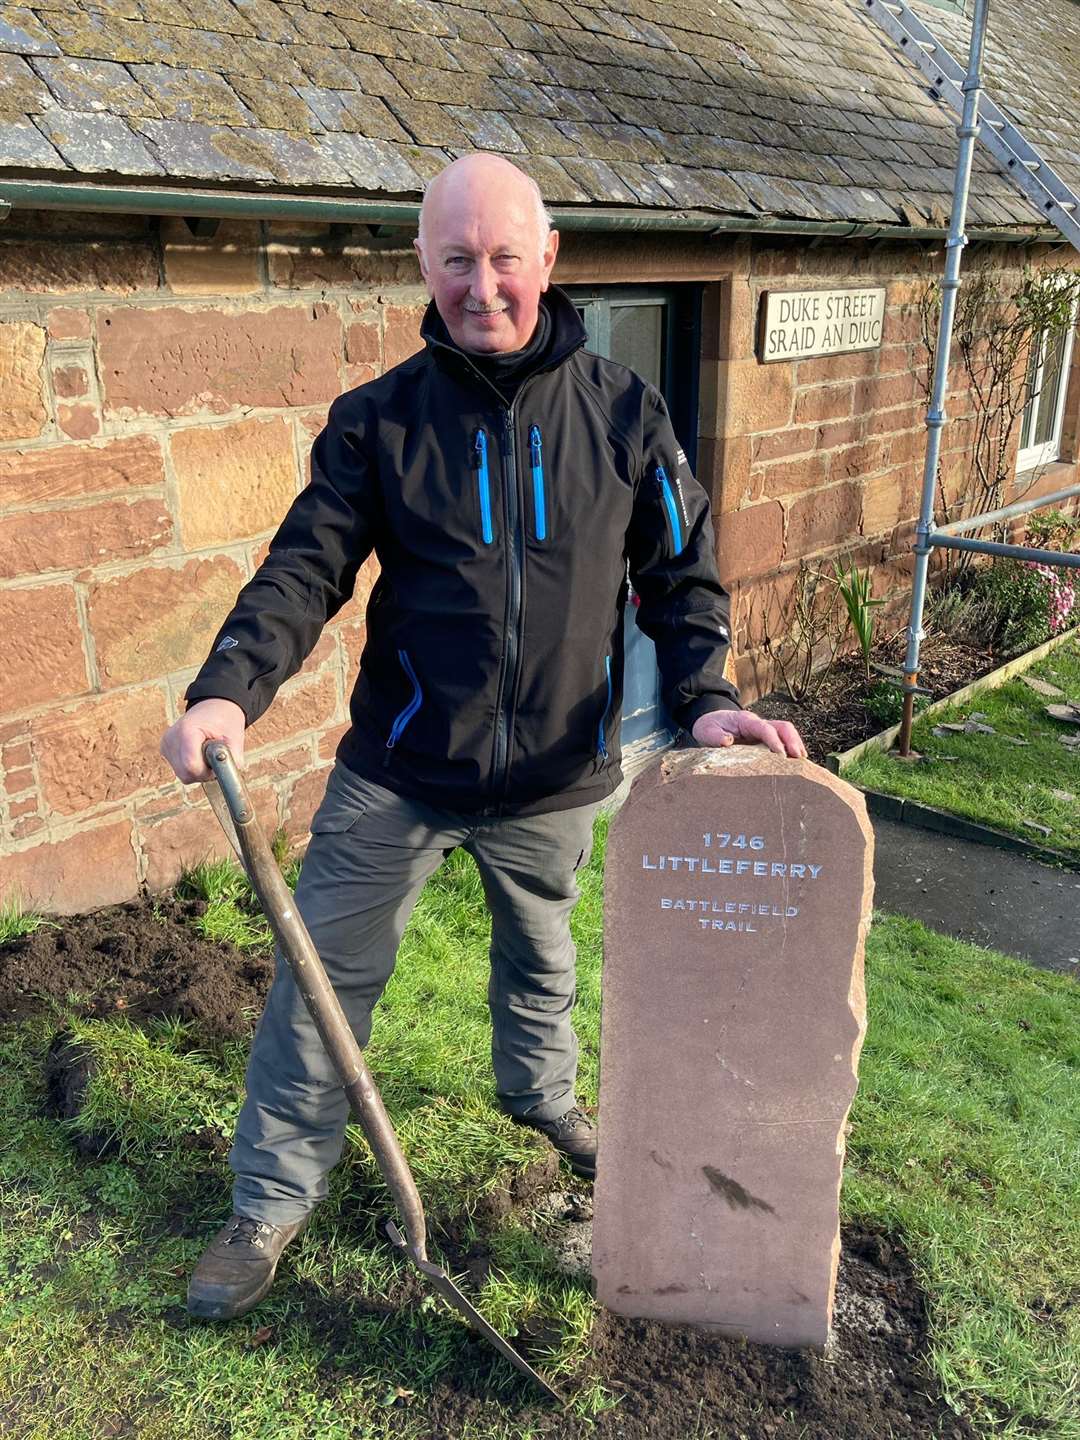 Community stalwart Iain Miller, a former community council chairman, was given the honour of turfing in a stone.